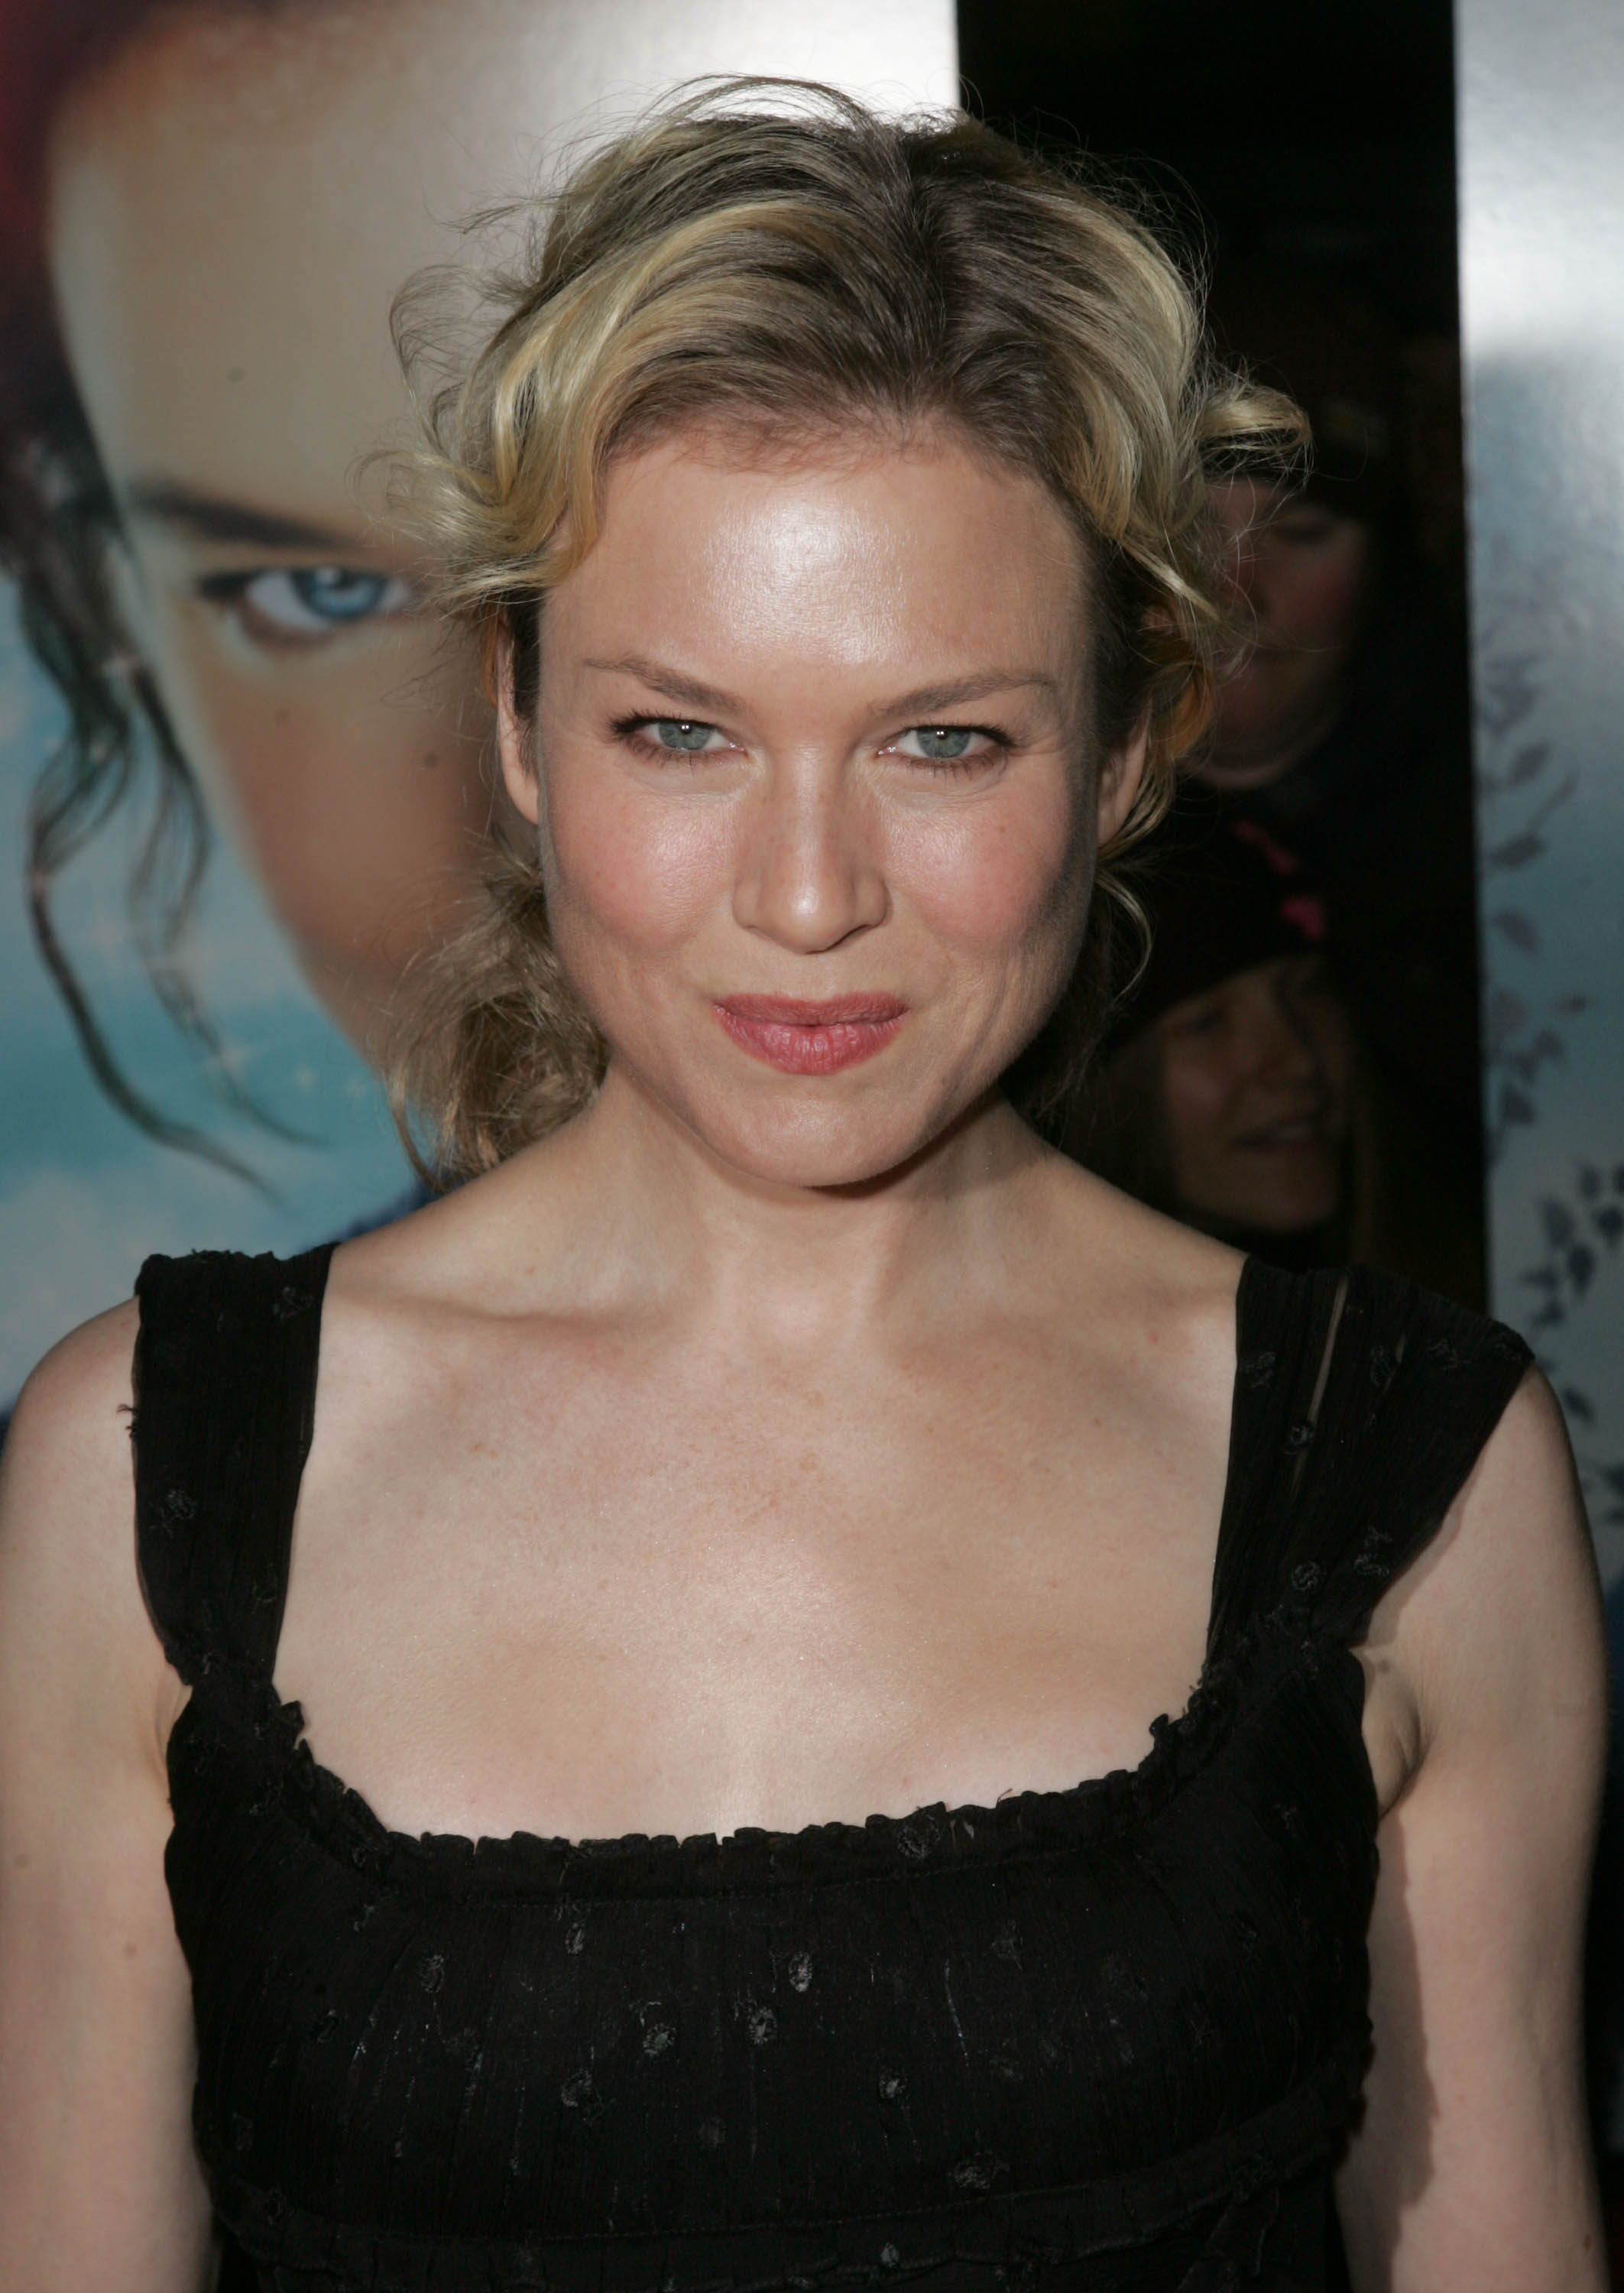 Renee Zellweger during Miss Potter New York Premiere at Directors Guild of America Theater on December 10, 2006 in New York City, New York. | Source: Getty Images